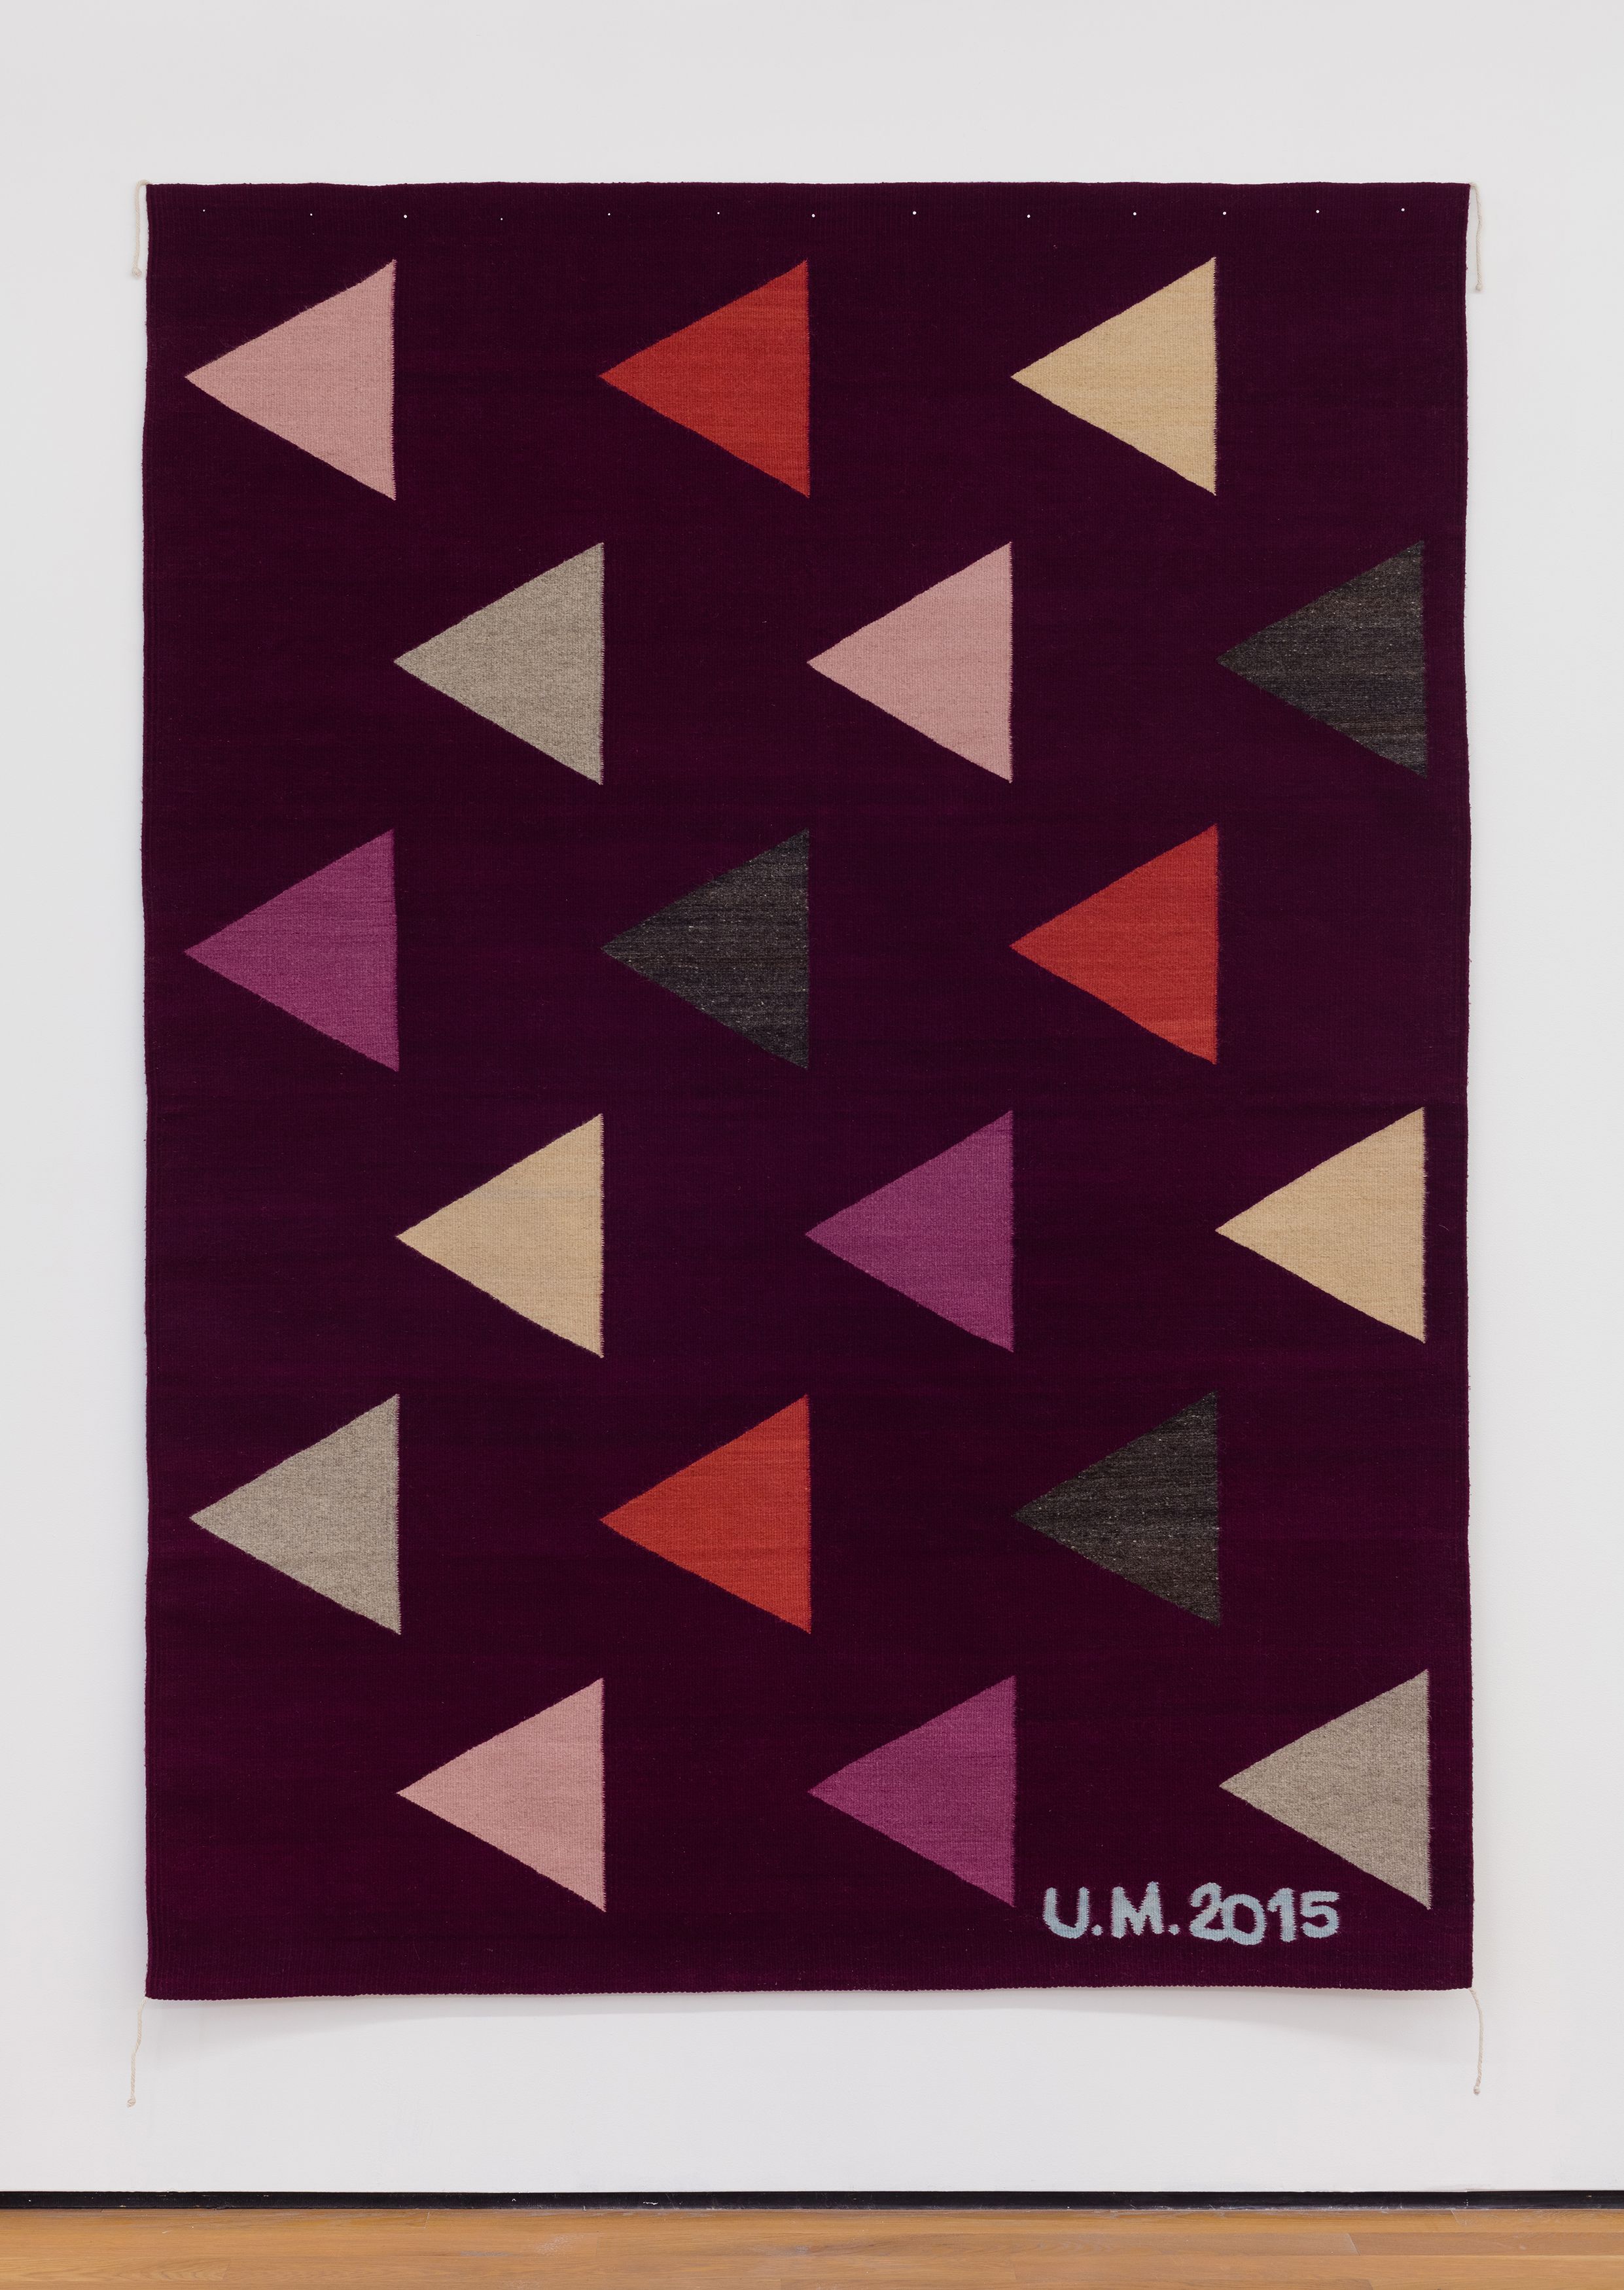 Ulrike Müller, Rug (con triángulos), 2015, wool, handwoven in the workshop of Jerónimo and Josefina Hernández Ruiz, Teotitlán del Valle, Oaxaca, Mexico, 86 x 64 3/8 in. (218.4 x 163.5 cm.) edition 2 of 3, with 1 AP